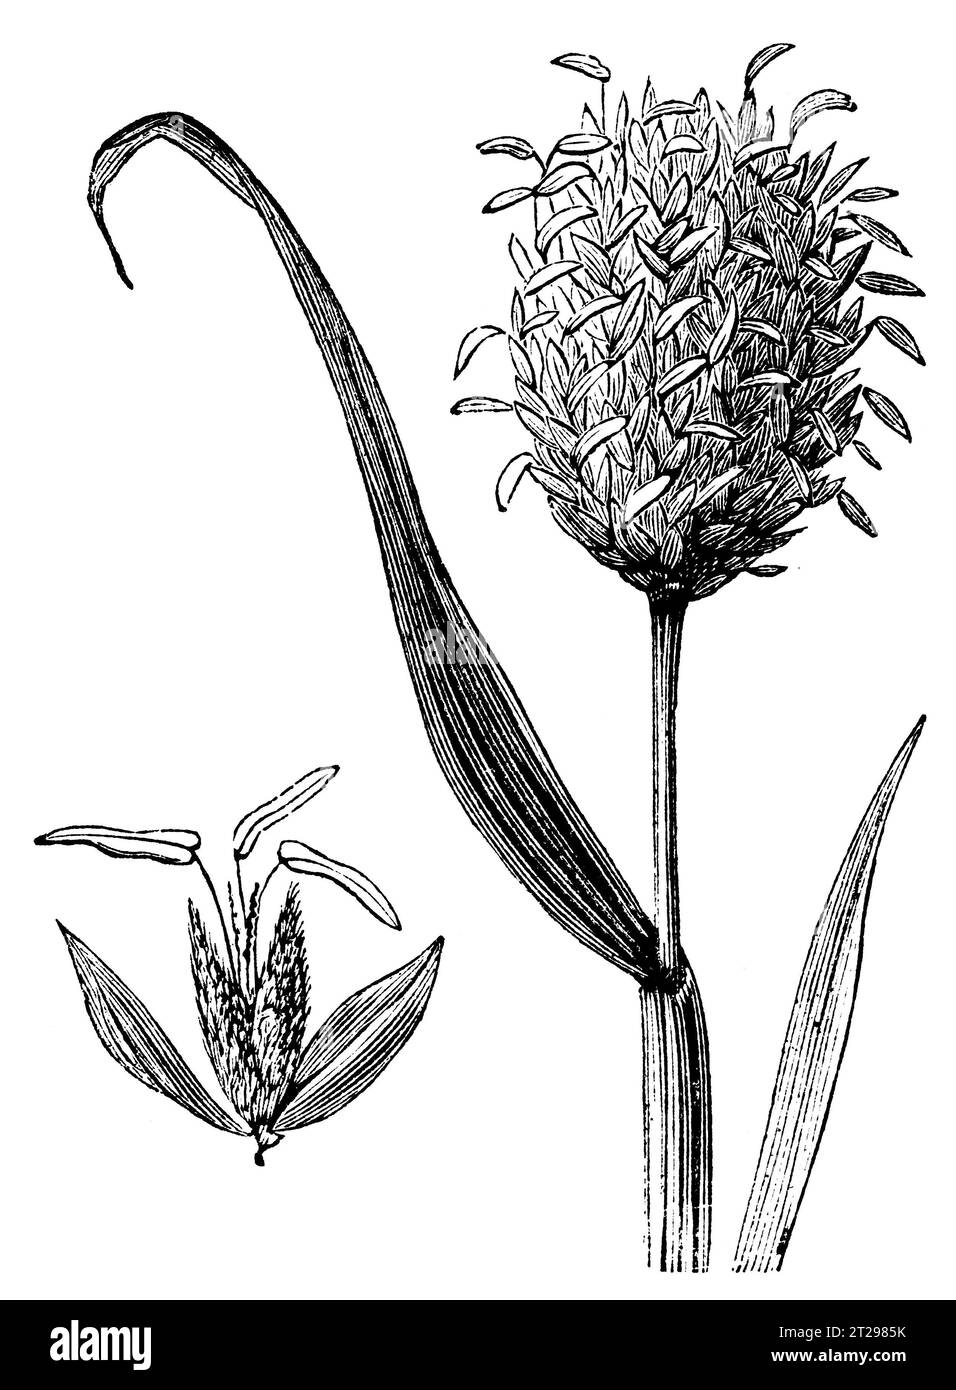 Phalaris canariensis, digitally restored illustration from 'The Condensed American Encyclopedia', published in the 19th century. Stock Photo